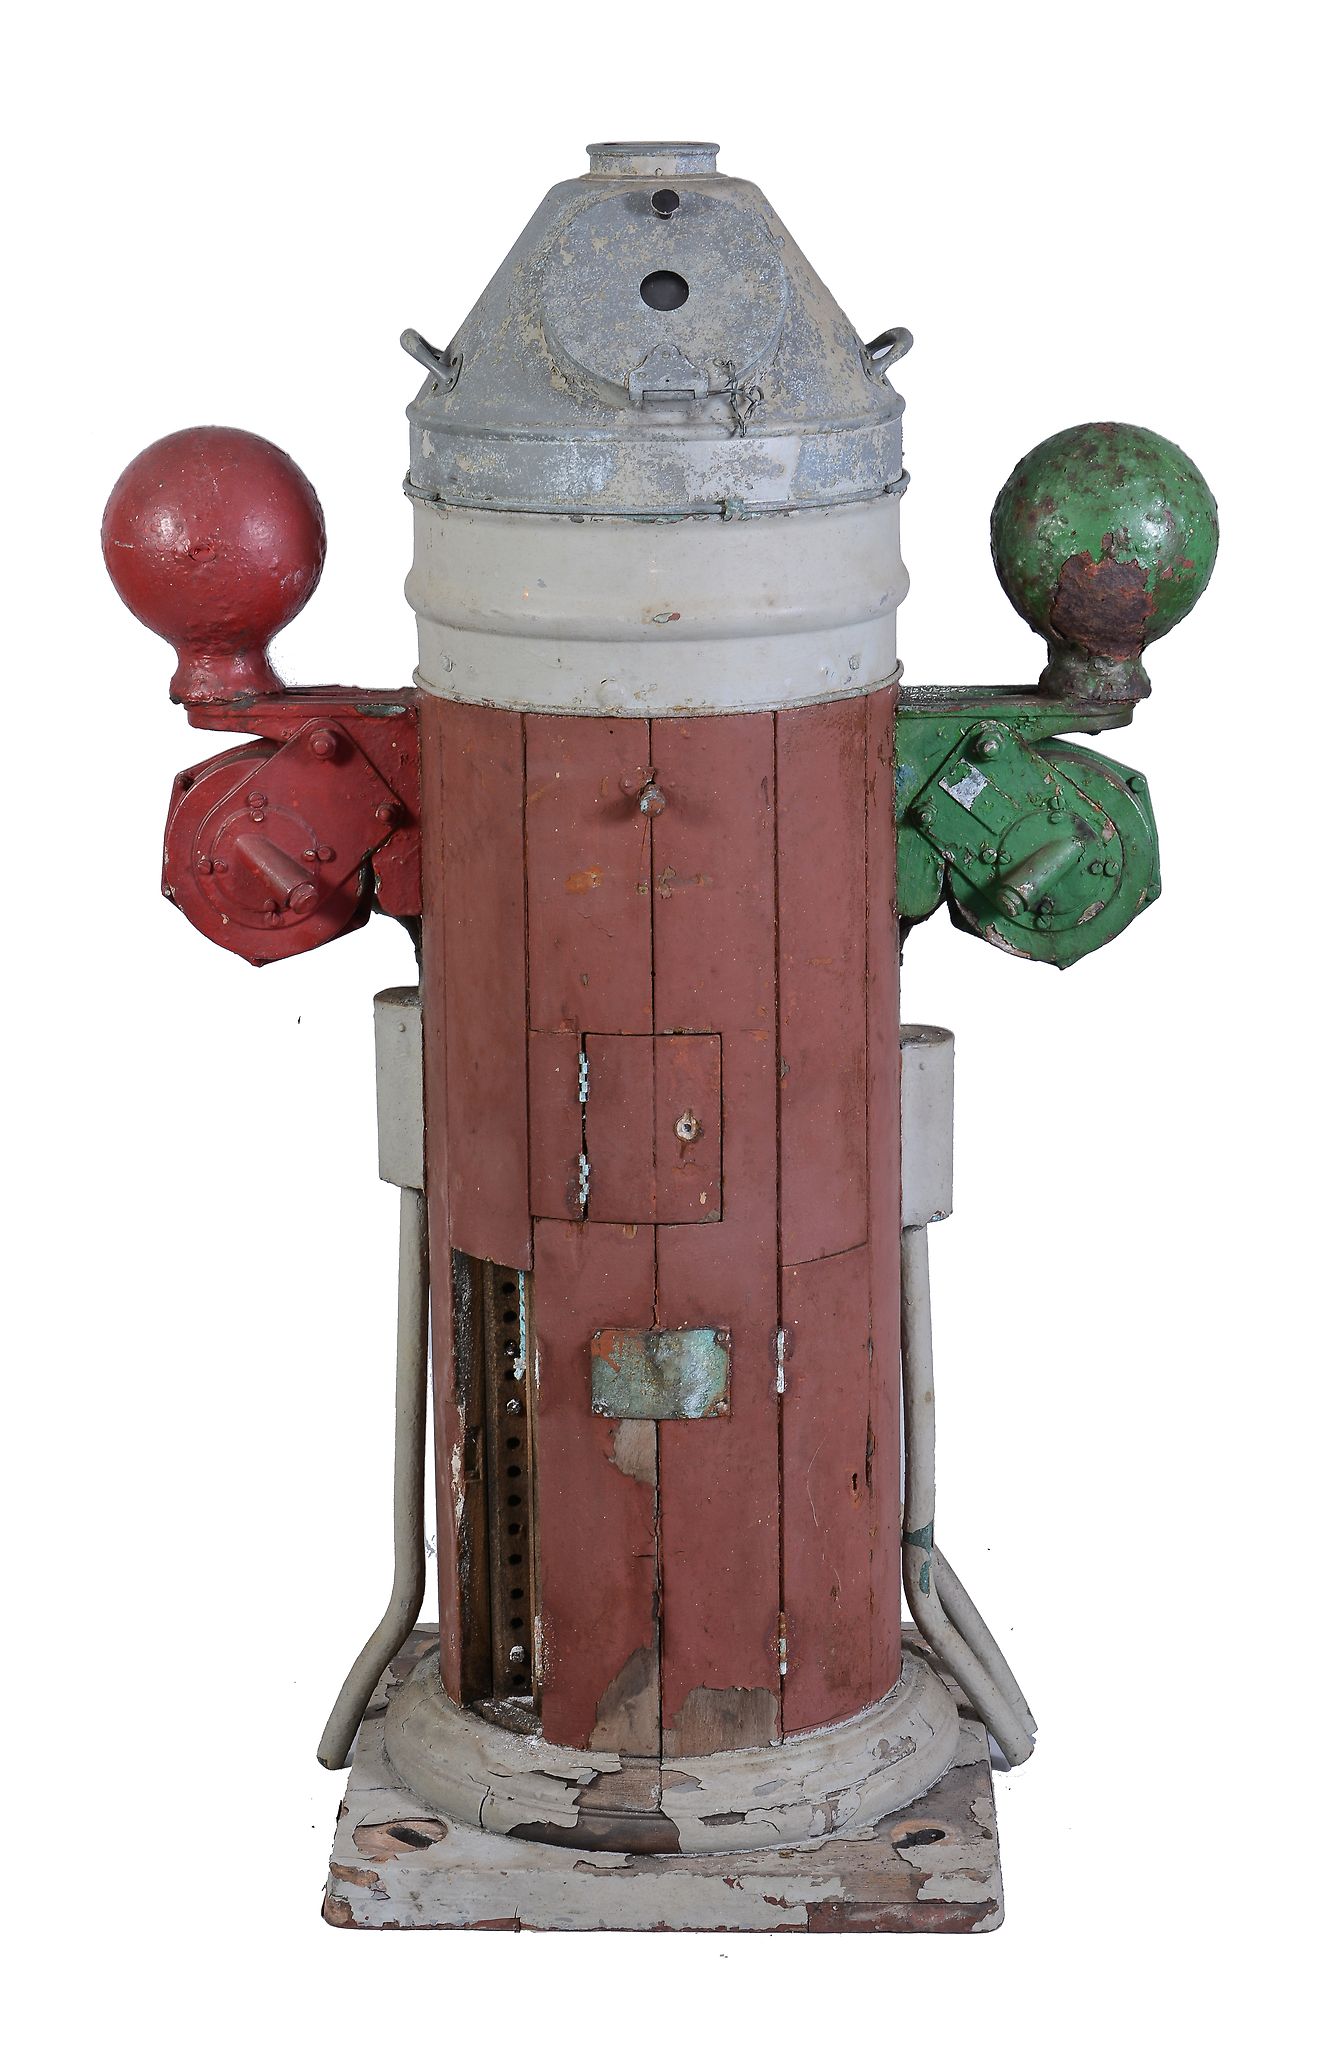 A ships binnacle, the galvanised hood enclosing the binnacle compass flanked by red and green